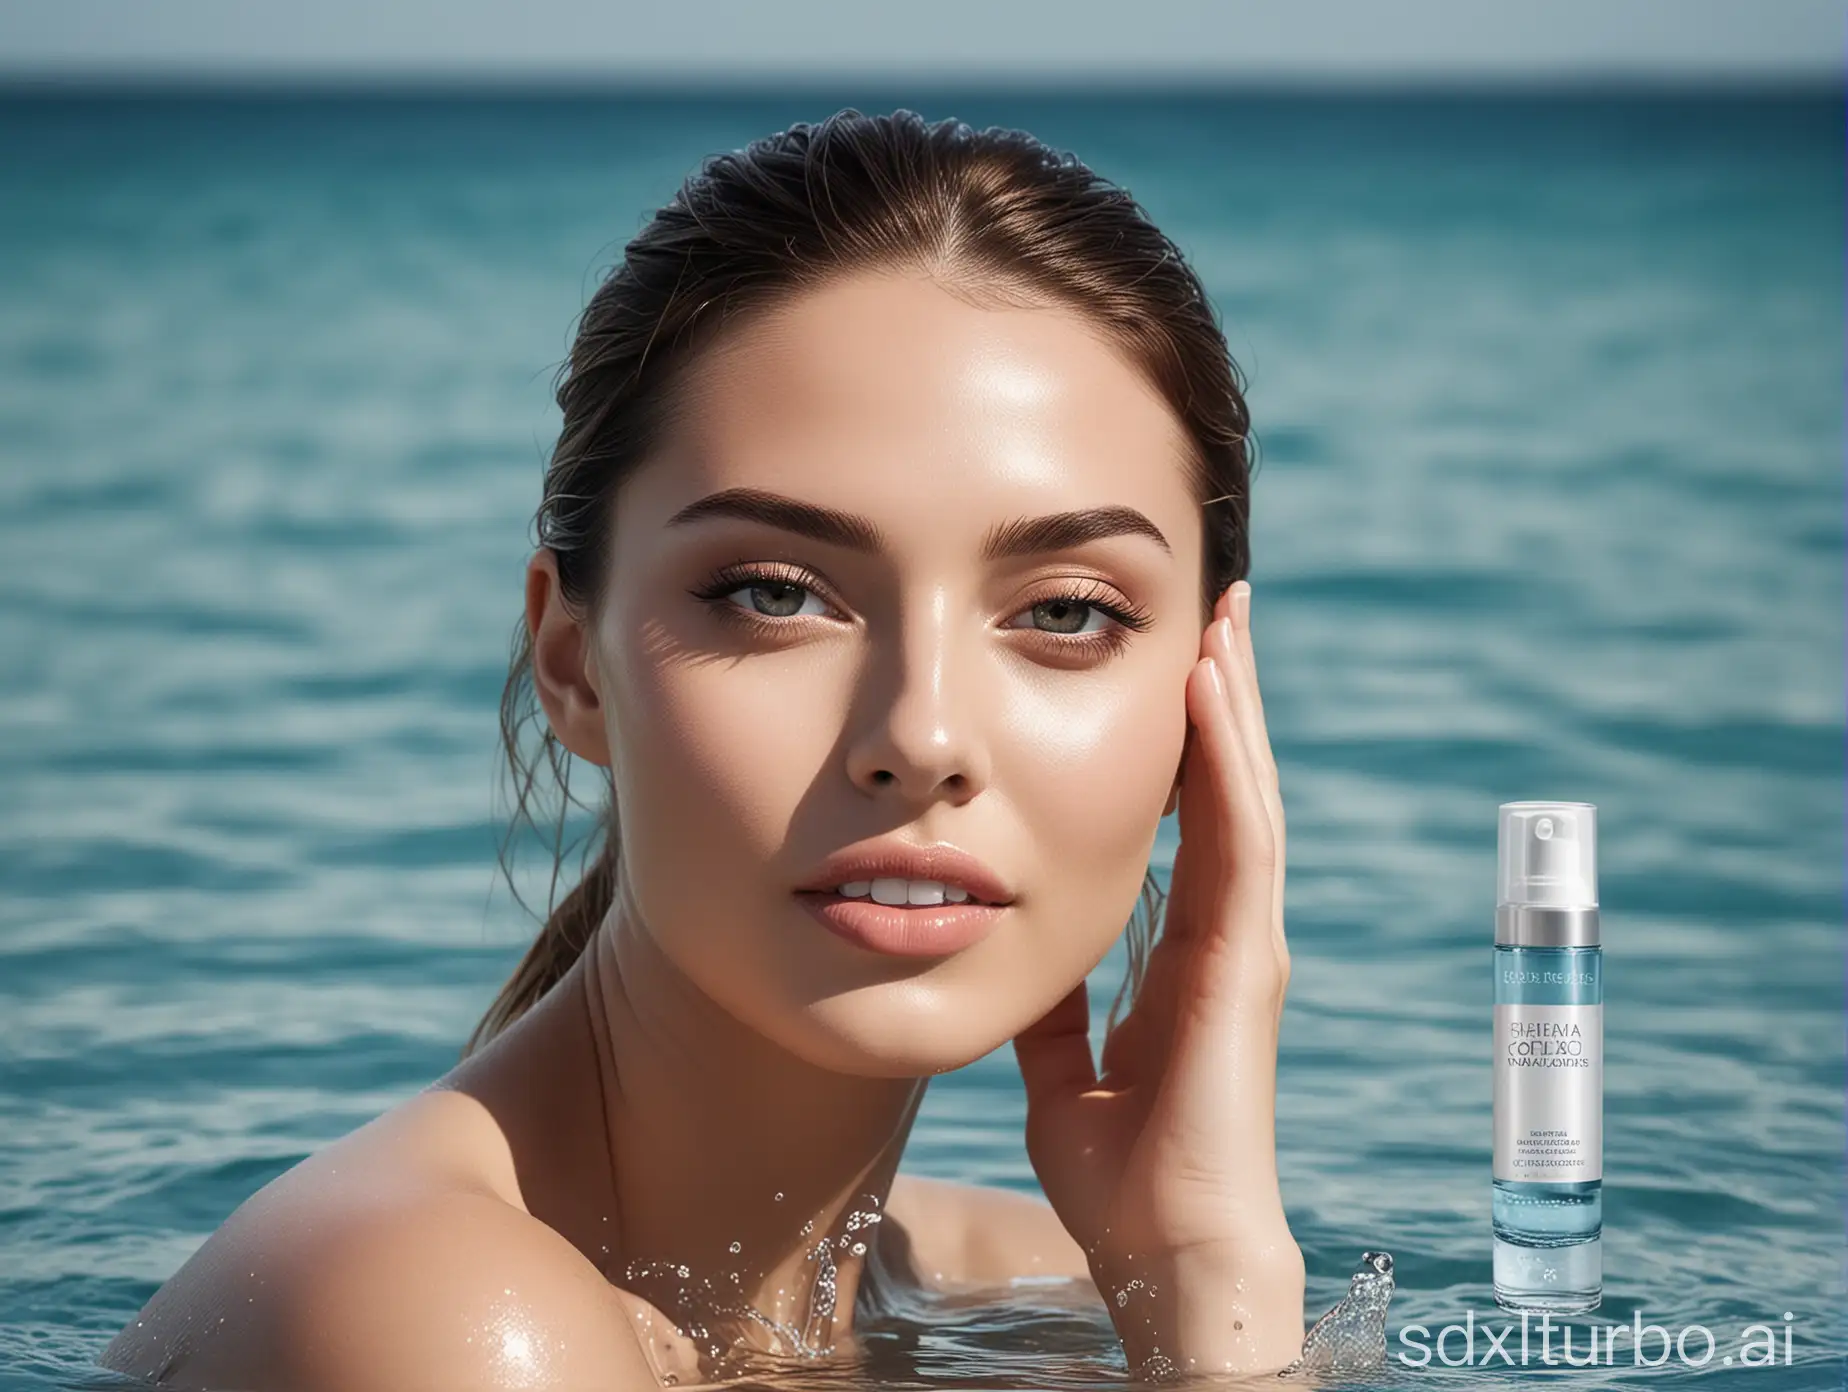 Advertisement for skincare products with a water background